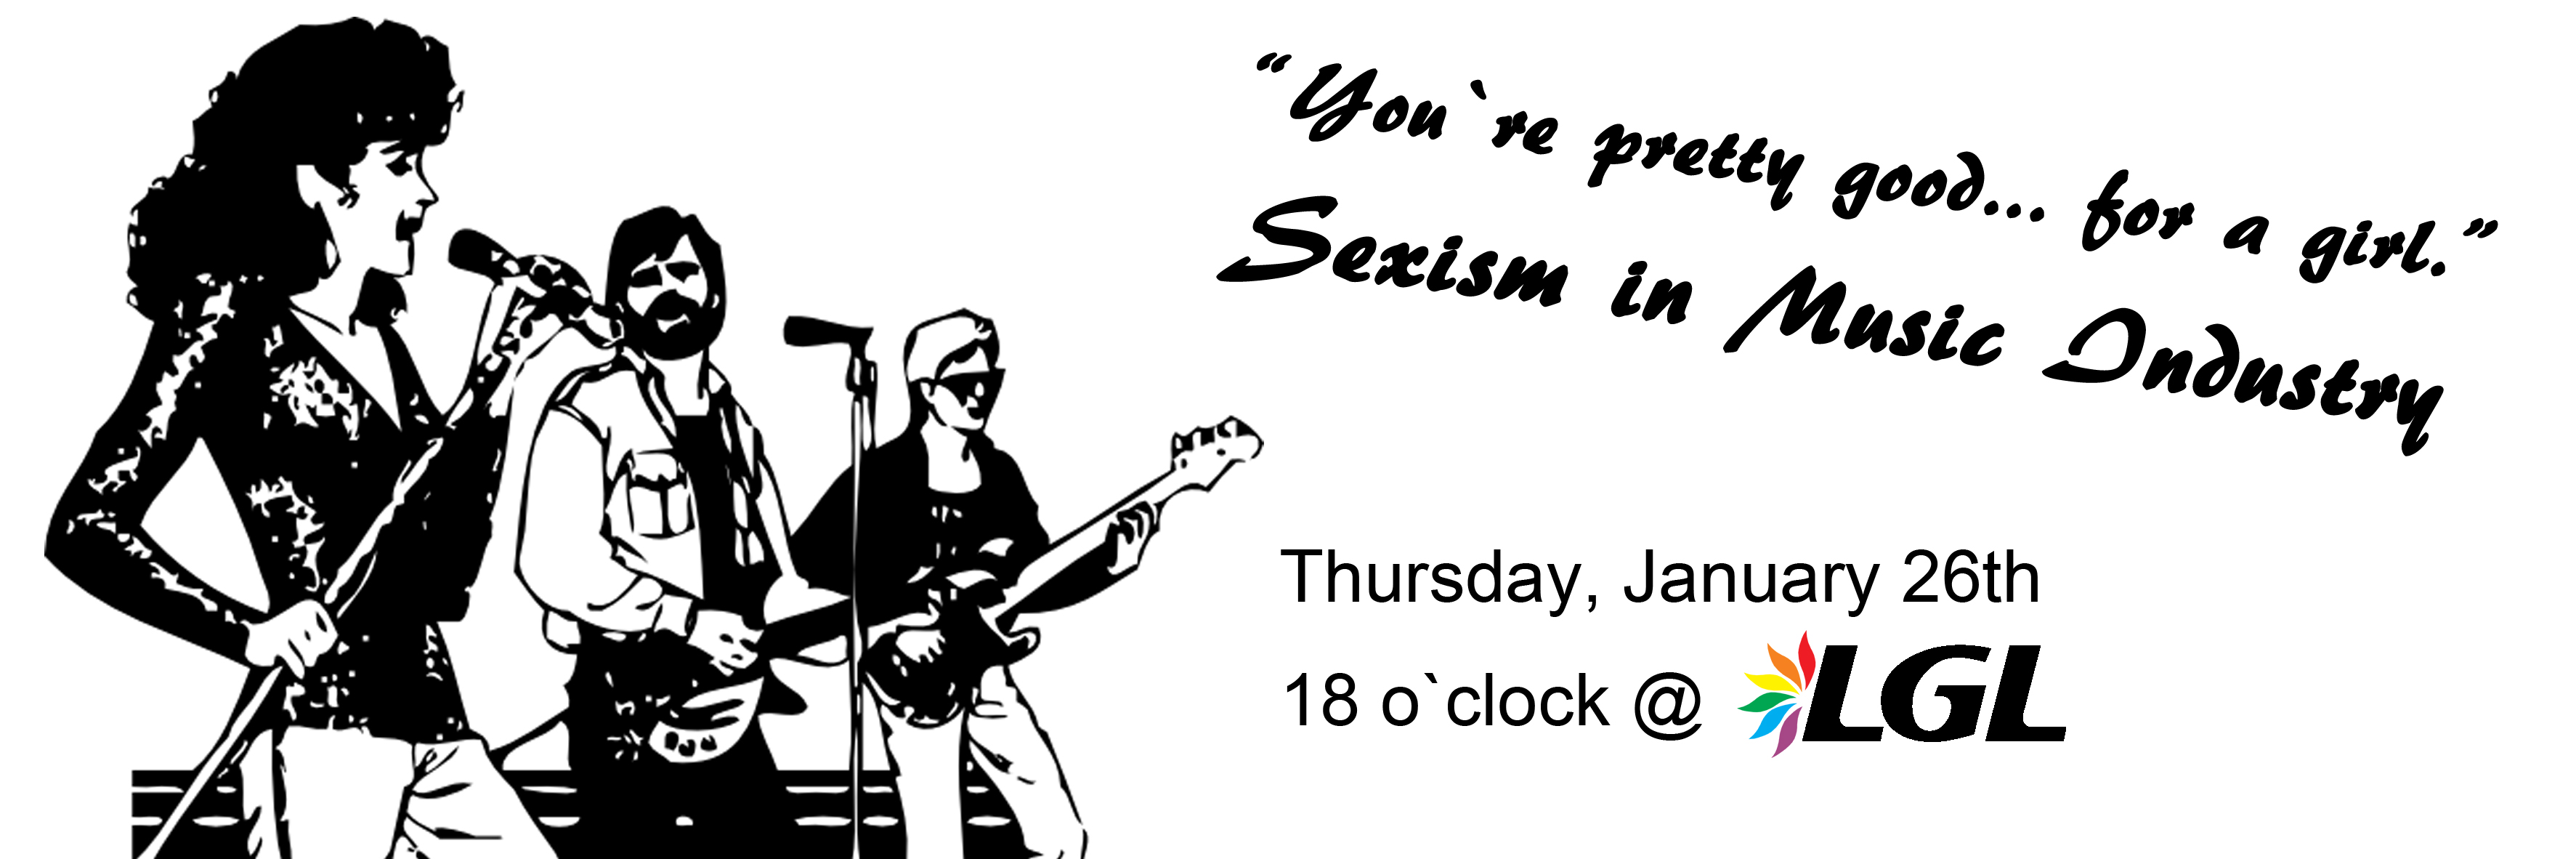 “You are pretty good… for a girl.” Sexism in Music Industry - Workshop